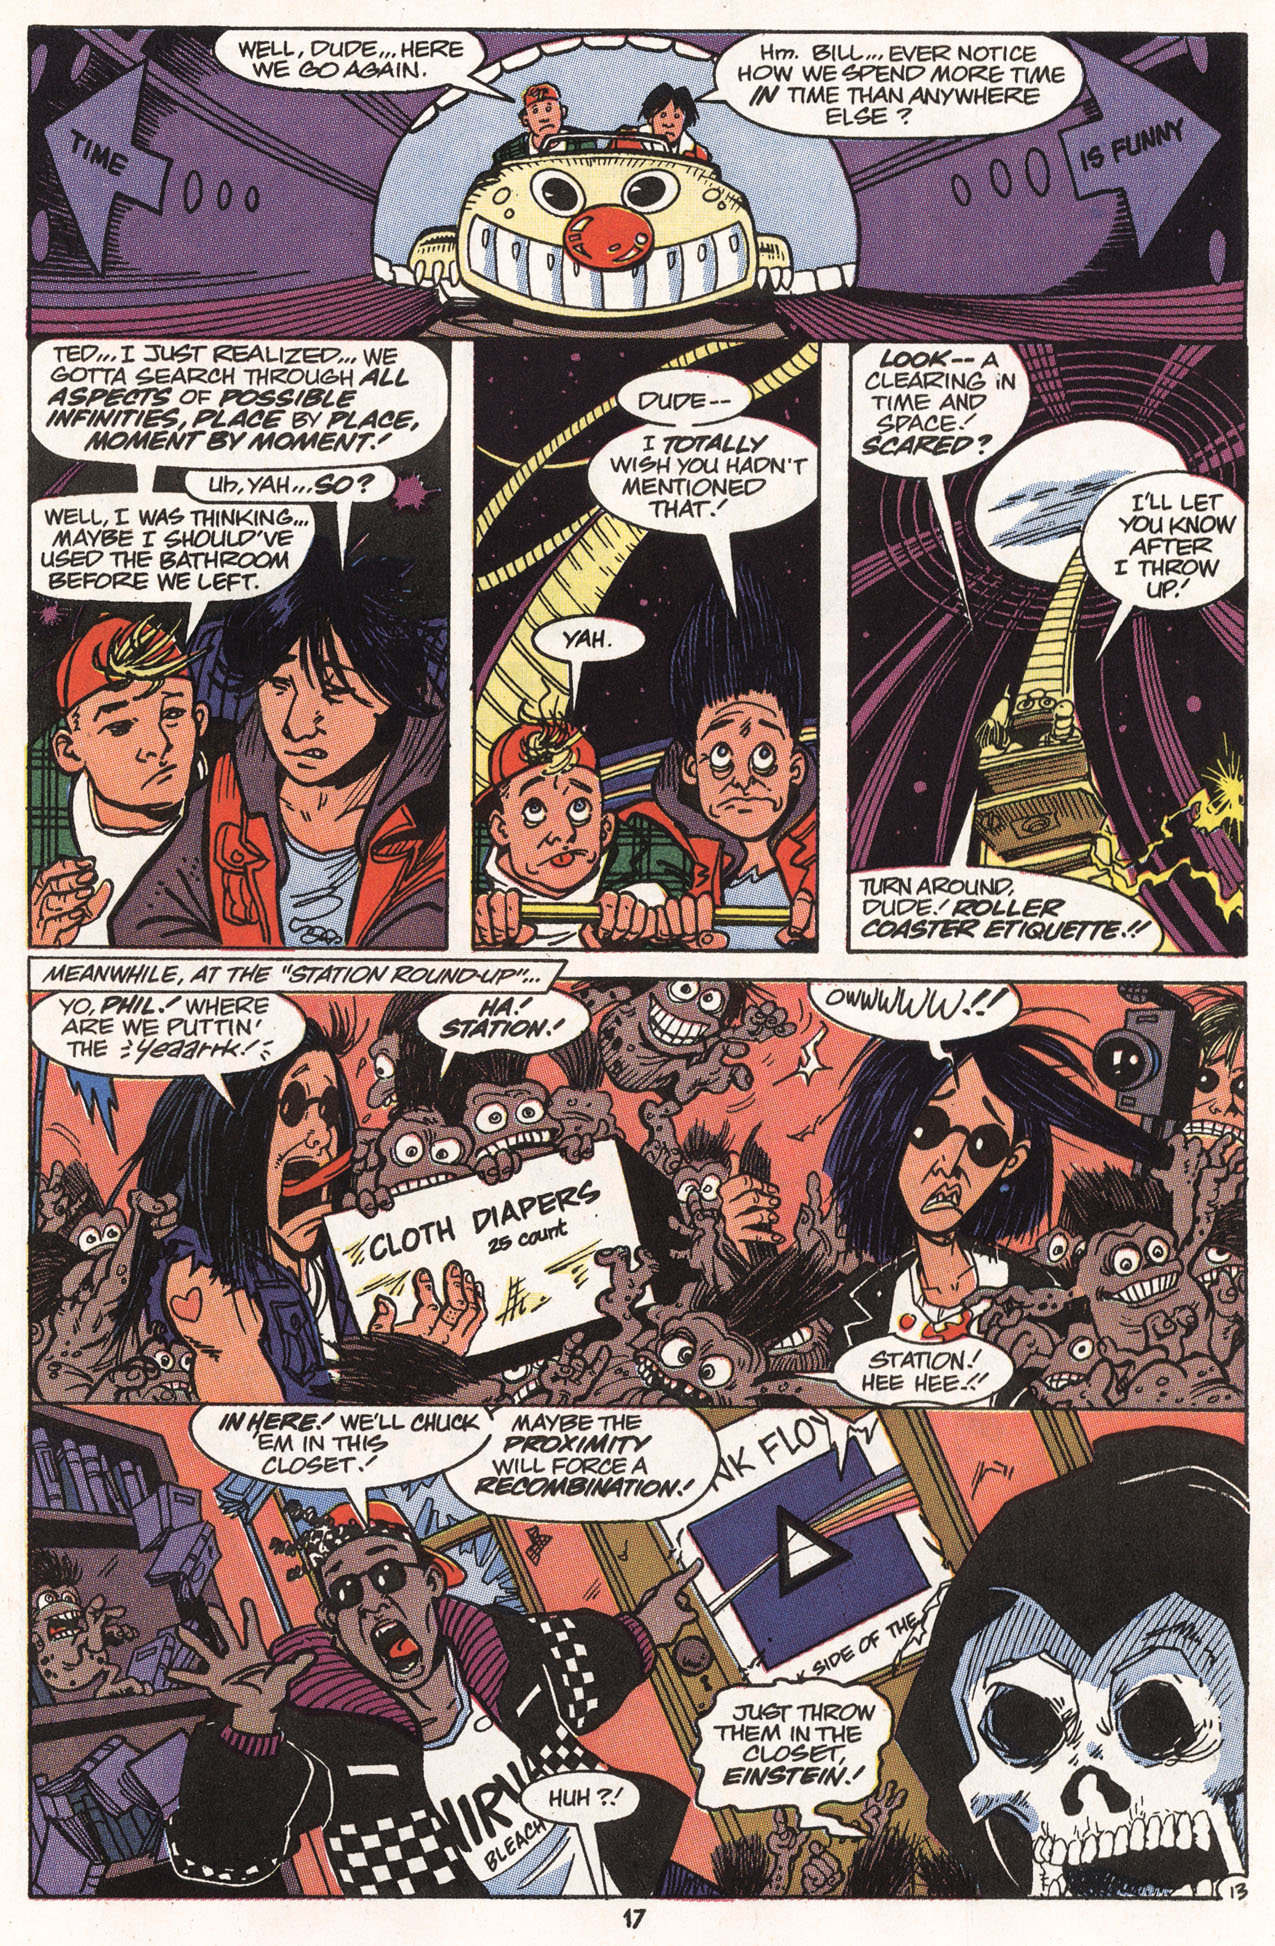 Read online Bill & Ted's Excellent Comic Book comic -  Issue #4 - 18